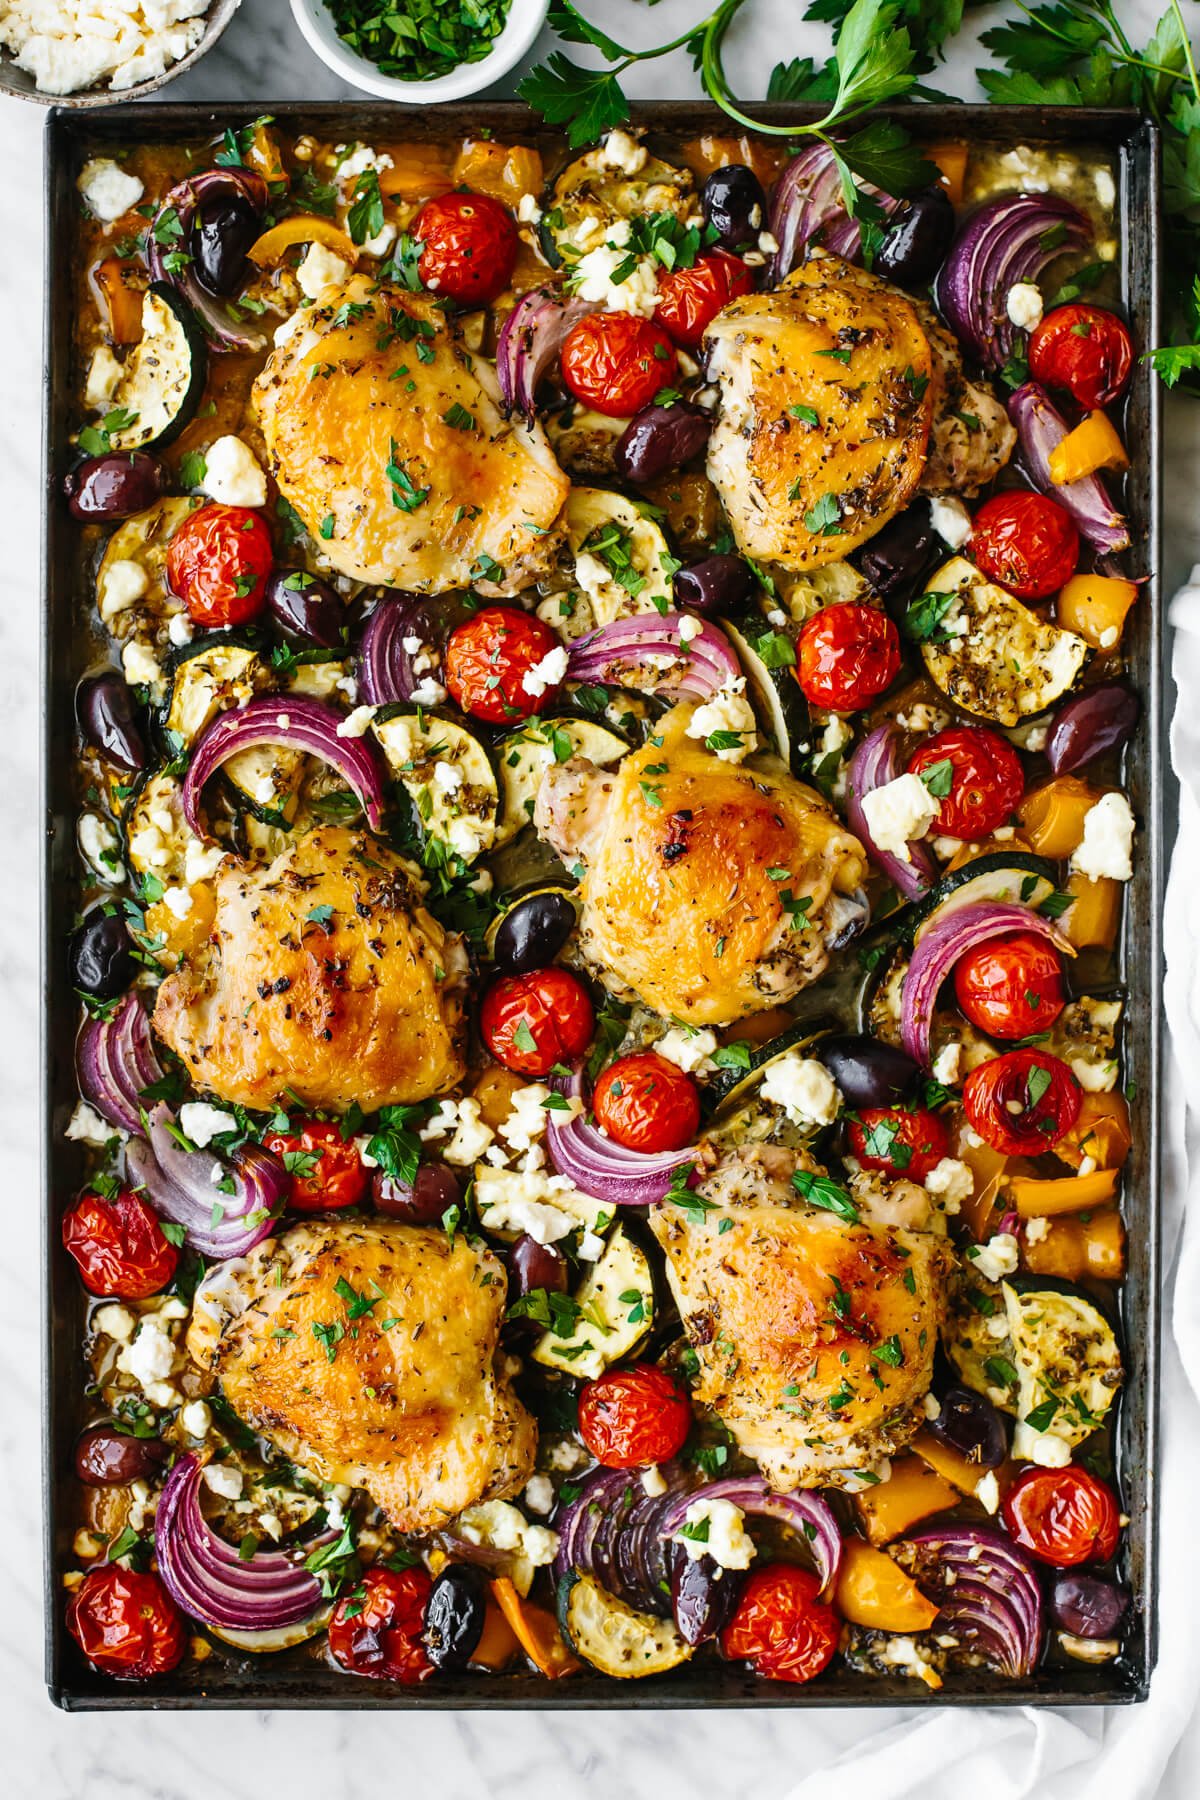 Cooked chicken and Mediterranean vegetables on a sheet pan.